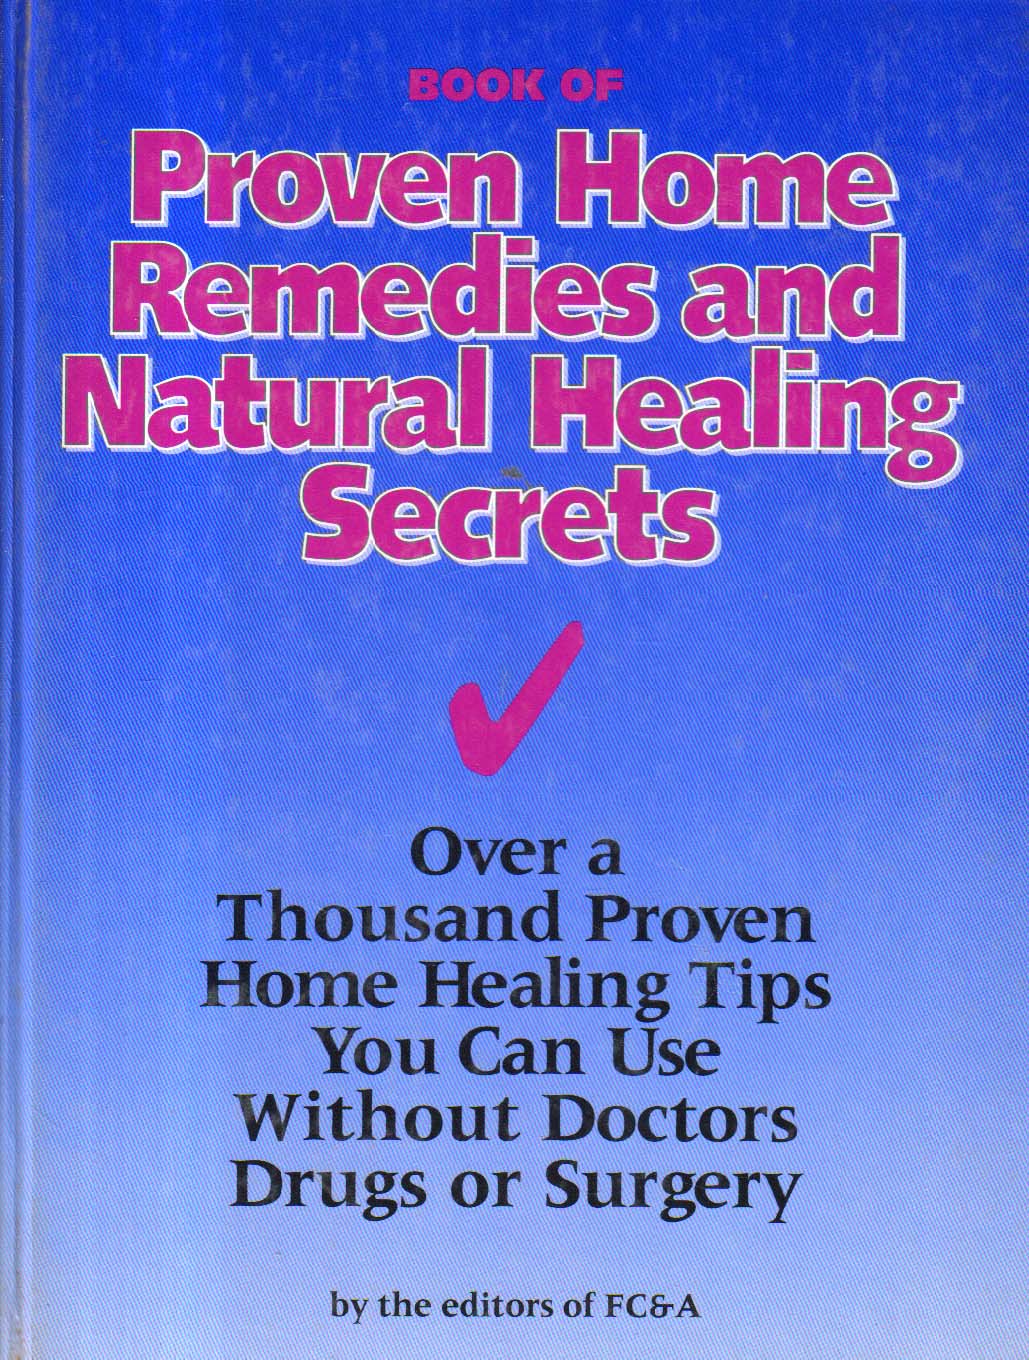 Book of Proven Home Remedies and Natural Healing Secrets.